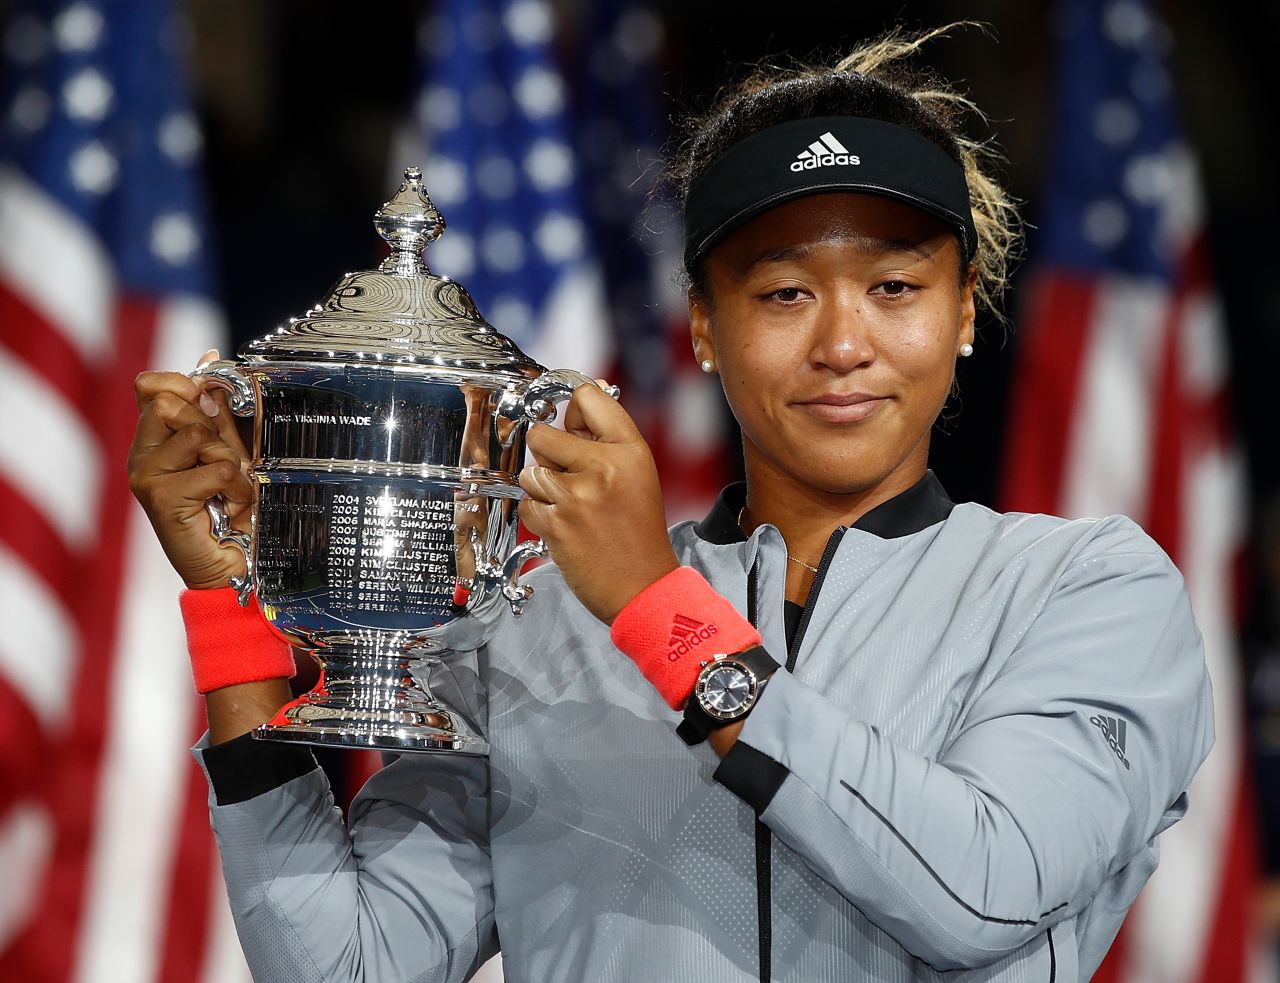 - The pair then met for a second time, at the <strong>2018</strong> <strong>US Open final. </strong>Serena was aiming for her 24th Grand Slam title and Osaka was competing in her first grand slam final.  Amid controversy involving her opponent and the umpire, the 20-year-old Japanese star deservedly won in straight sets for her biggest career win to date, earning $3.8 million in the process. 